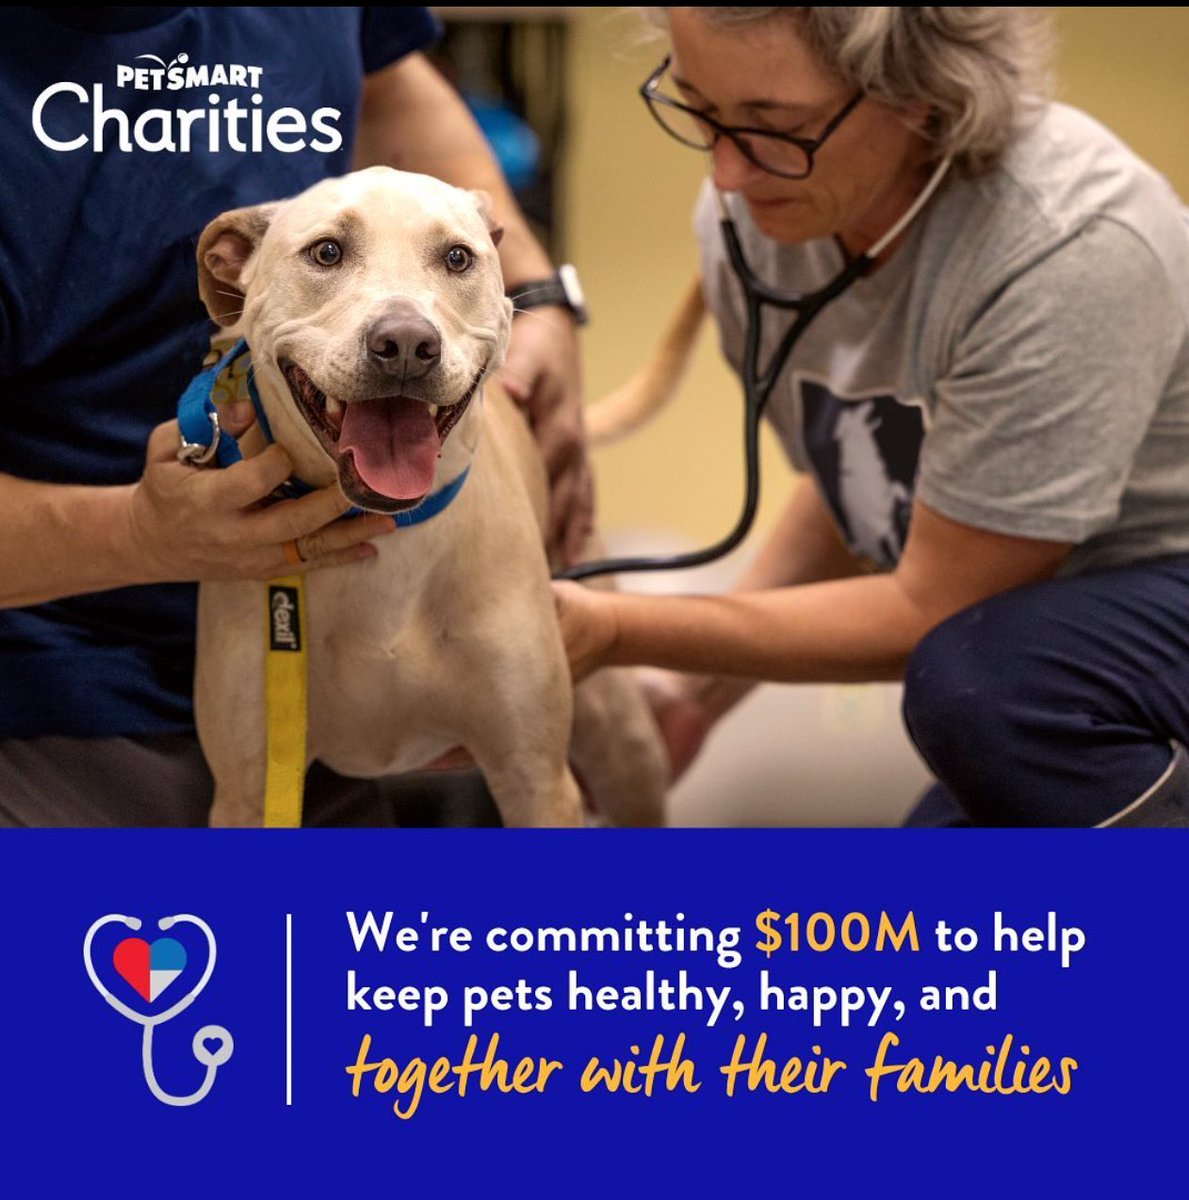 #PetSmartCharities is proud to lead the change for good to ensure pets in need receive care because here within #LifeAtPetSmart, we know that pets are family too. ❤️ #anythingforpets

#chicago #hiringinchicago #dogs #petlovers #teamwork #positiveimpact